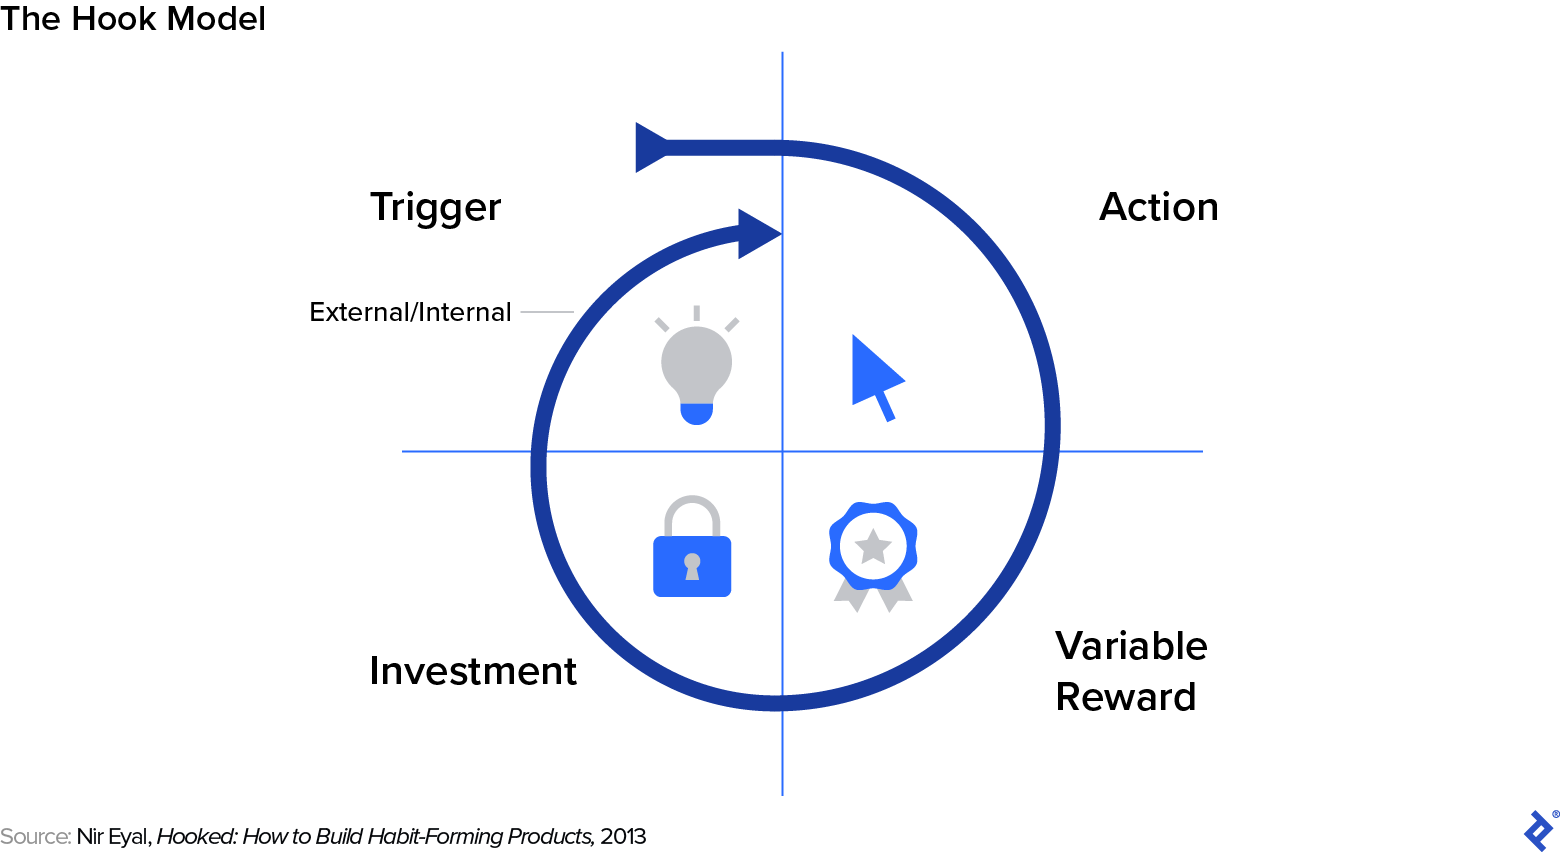 The hook model shows the customer journey through external or internal trigger, action, variable reward, and investment.